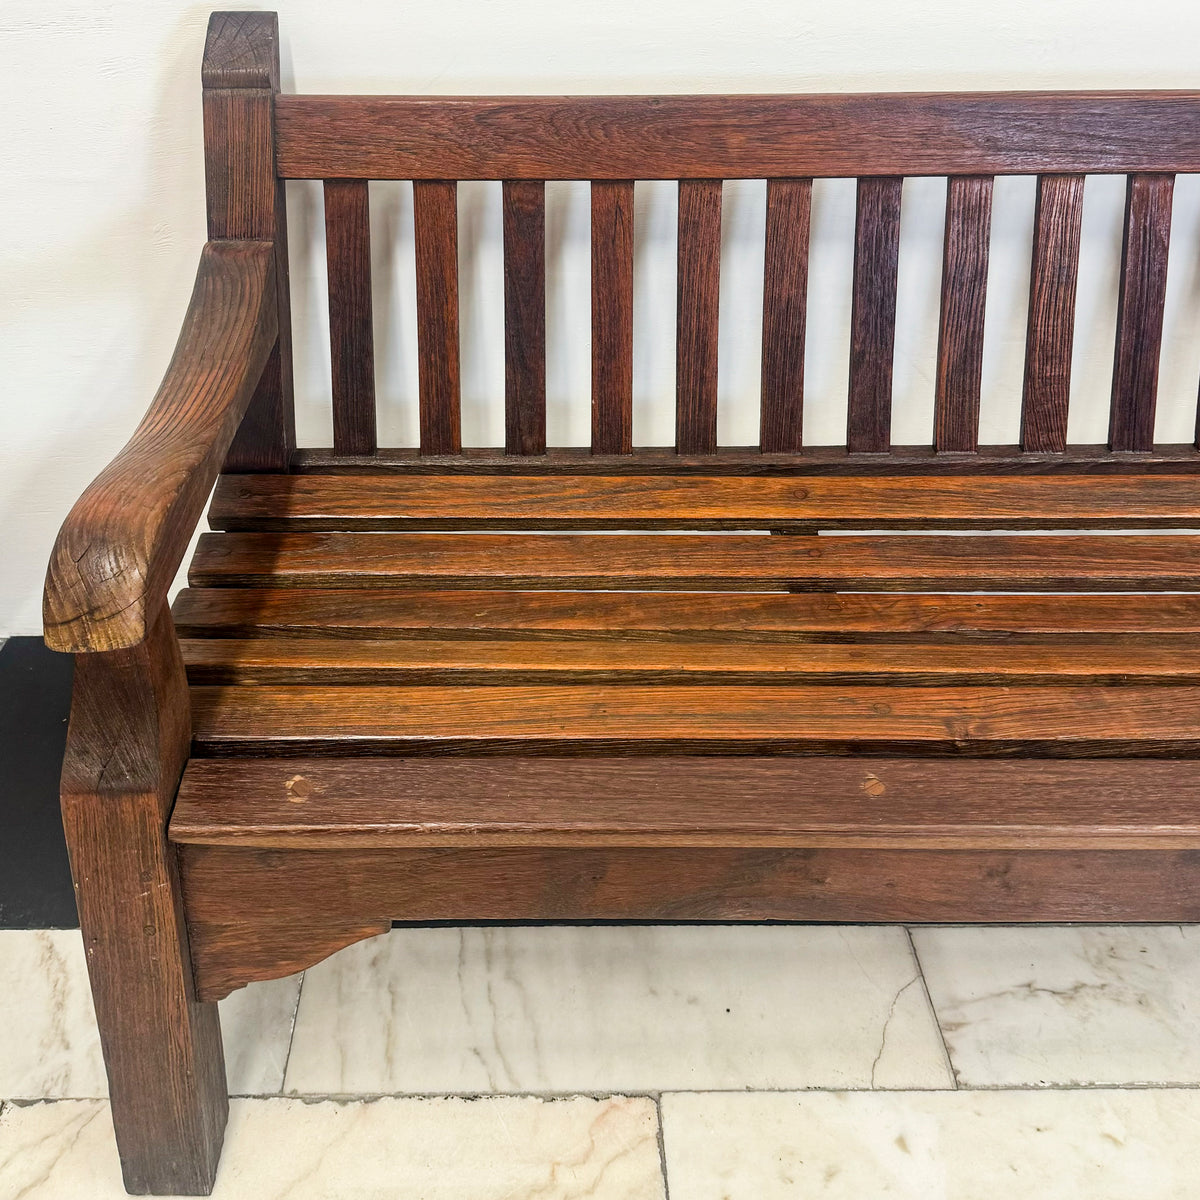 Reclaimed Teak Wooden Bench | The Architectural Forum